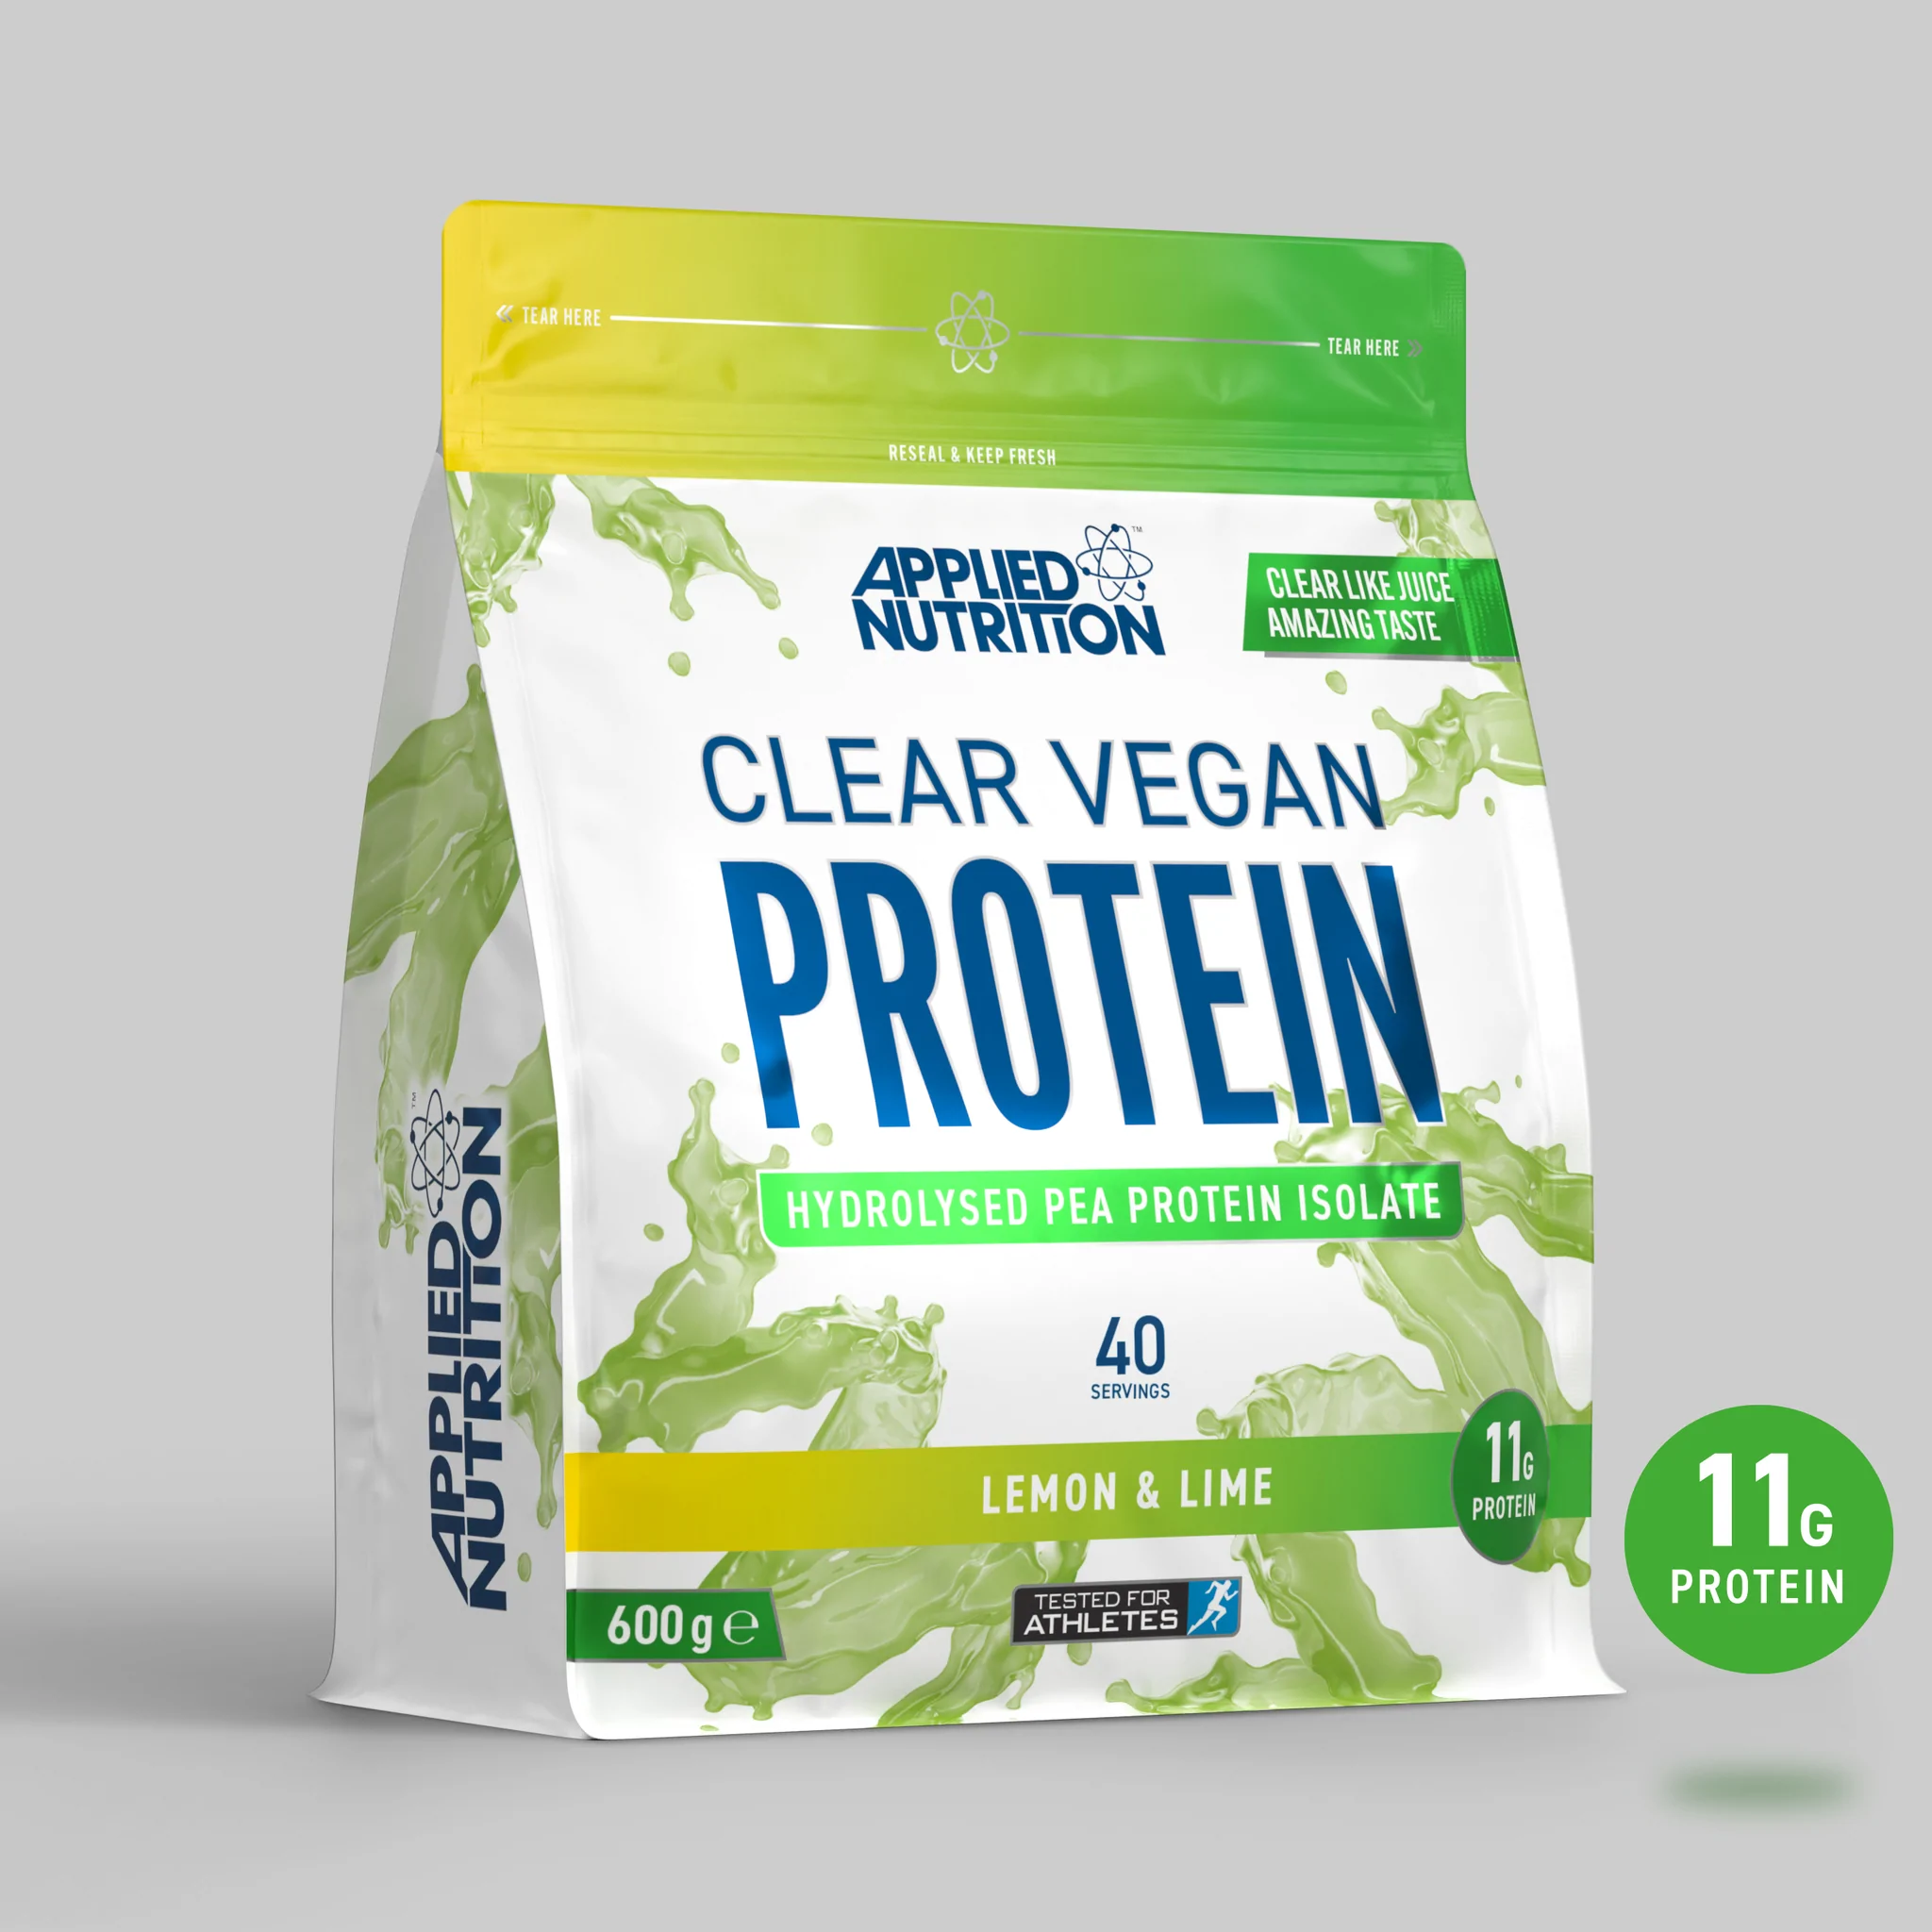 APPLIED NUTRITION - CLEAR VEGAN PROTEIN 600g